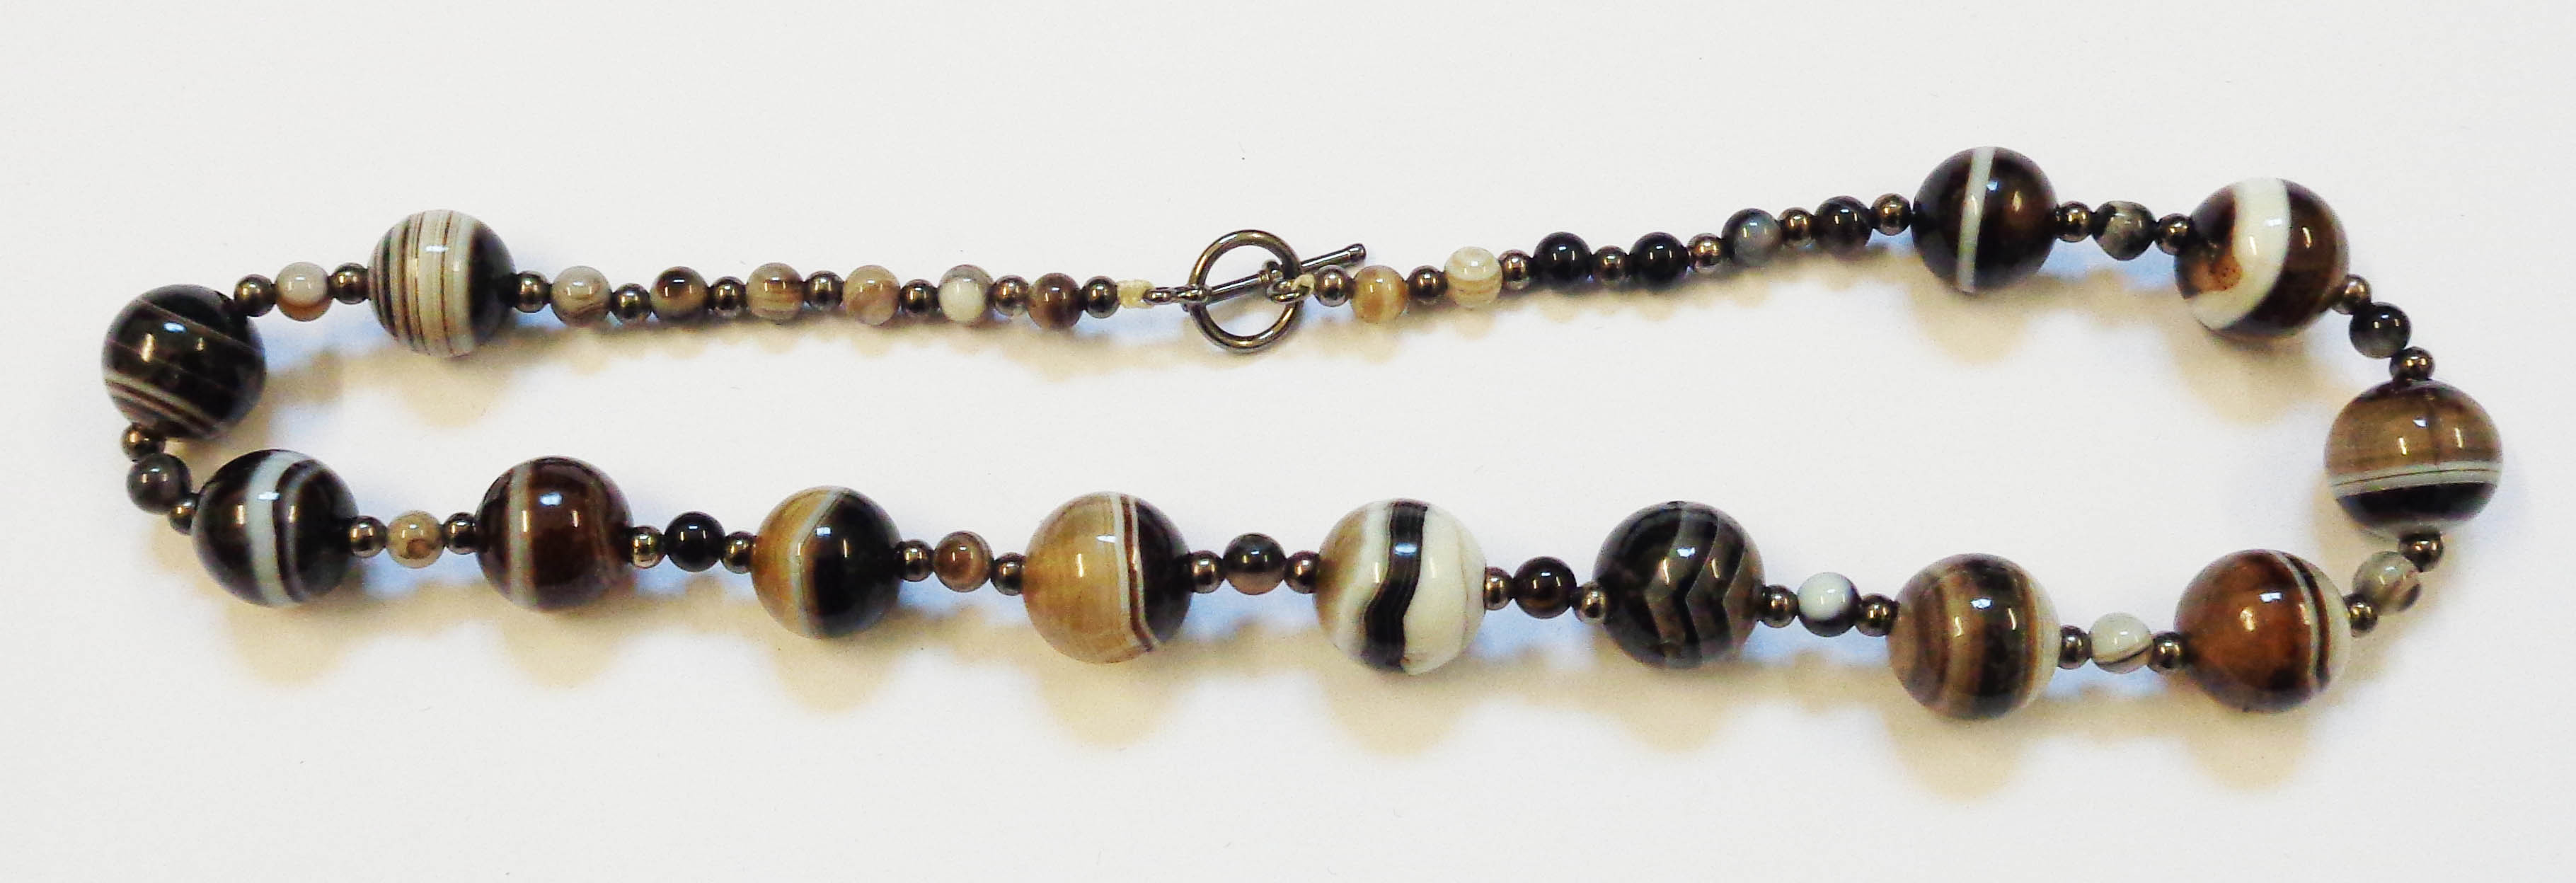 A banded agate bead choker necklace